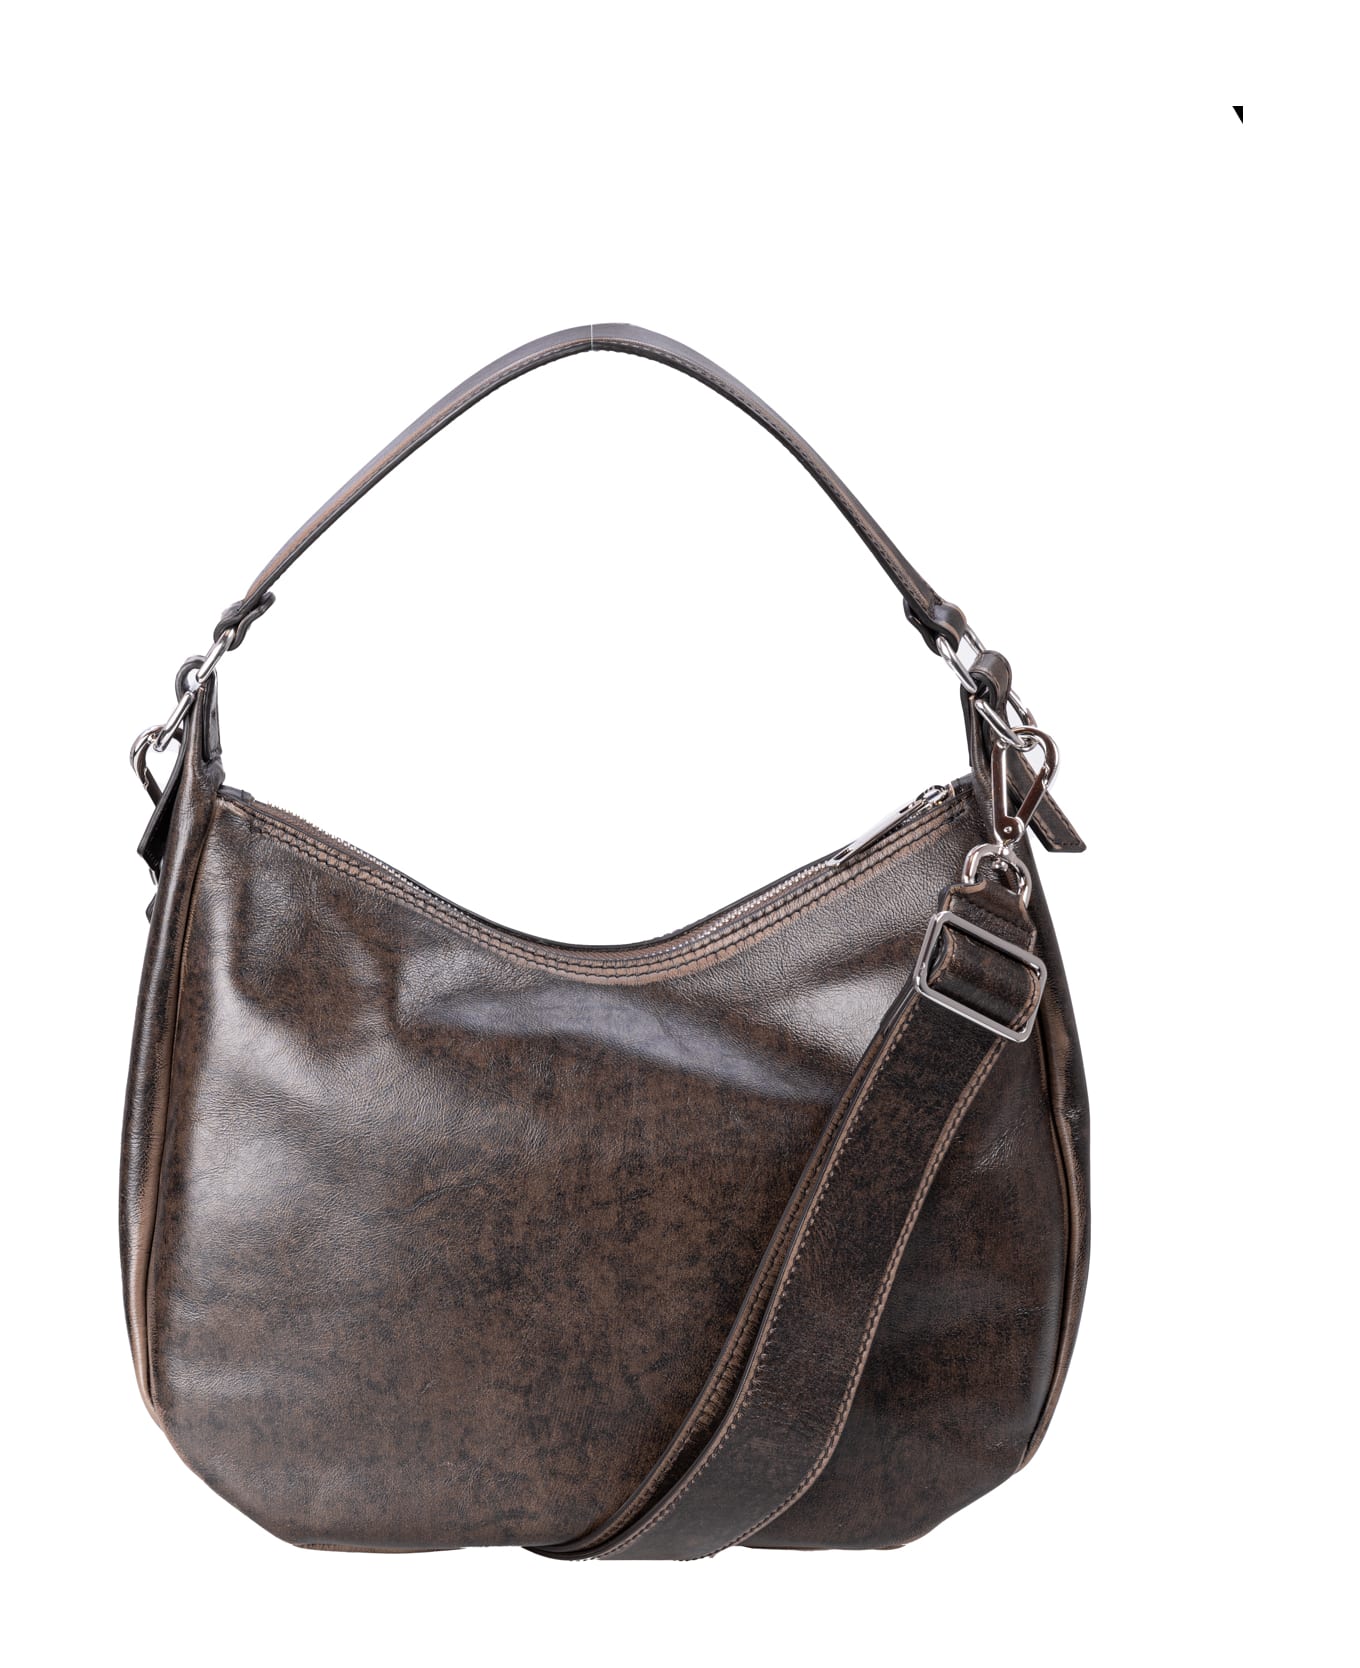 Orciani Leather Bag - Beige